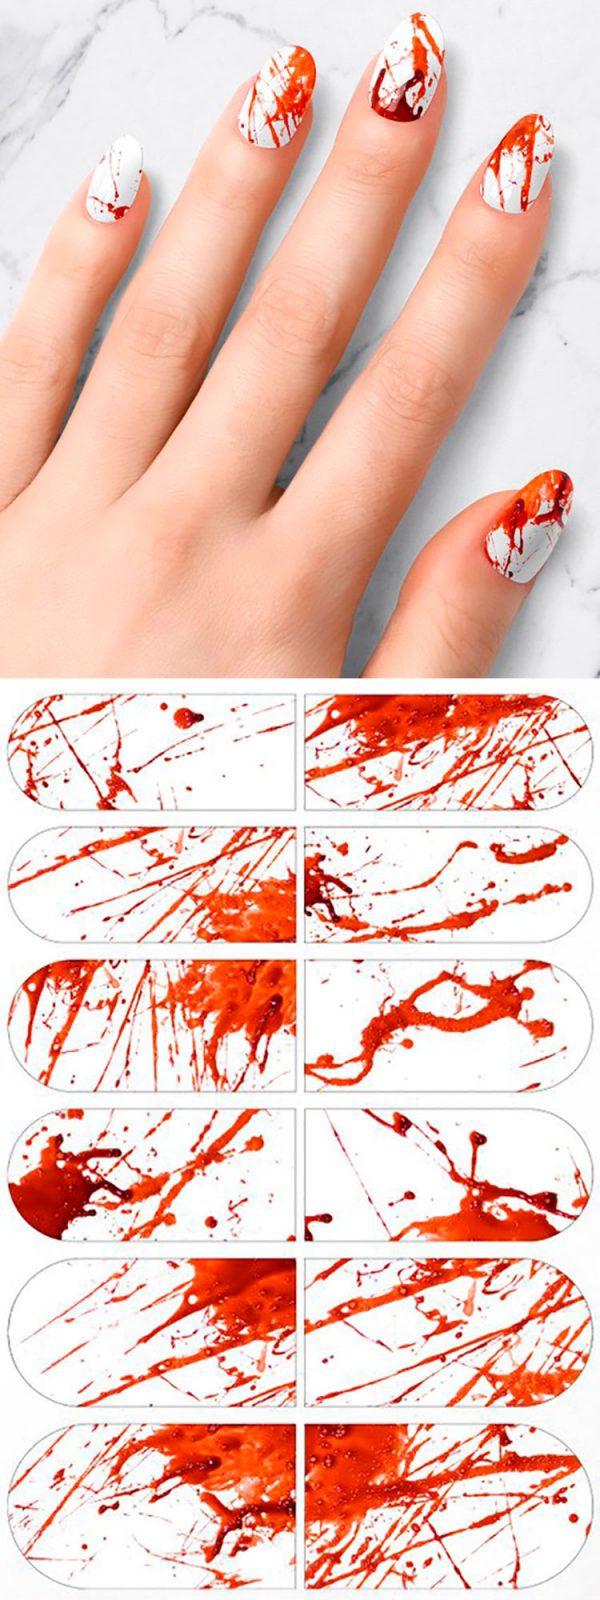 Bloody Halloween nail art stickers to wear most creepy Halloween nails